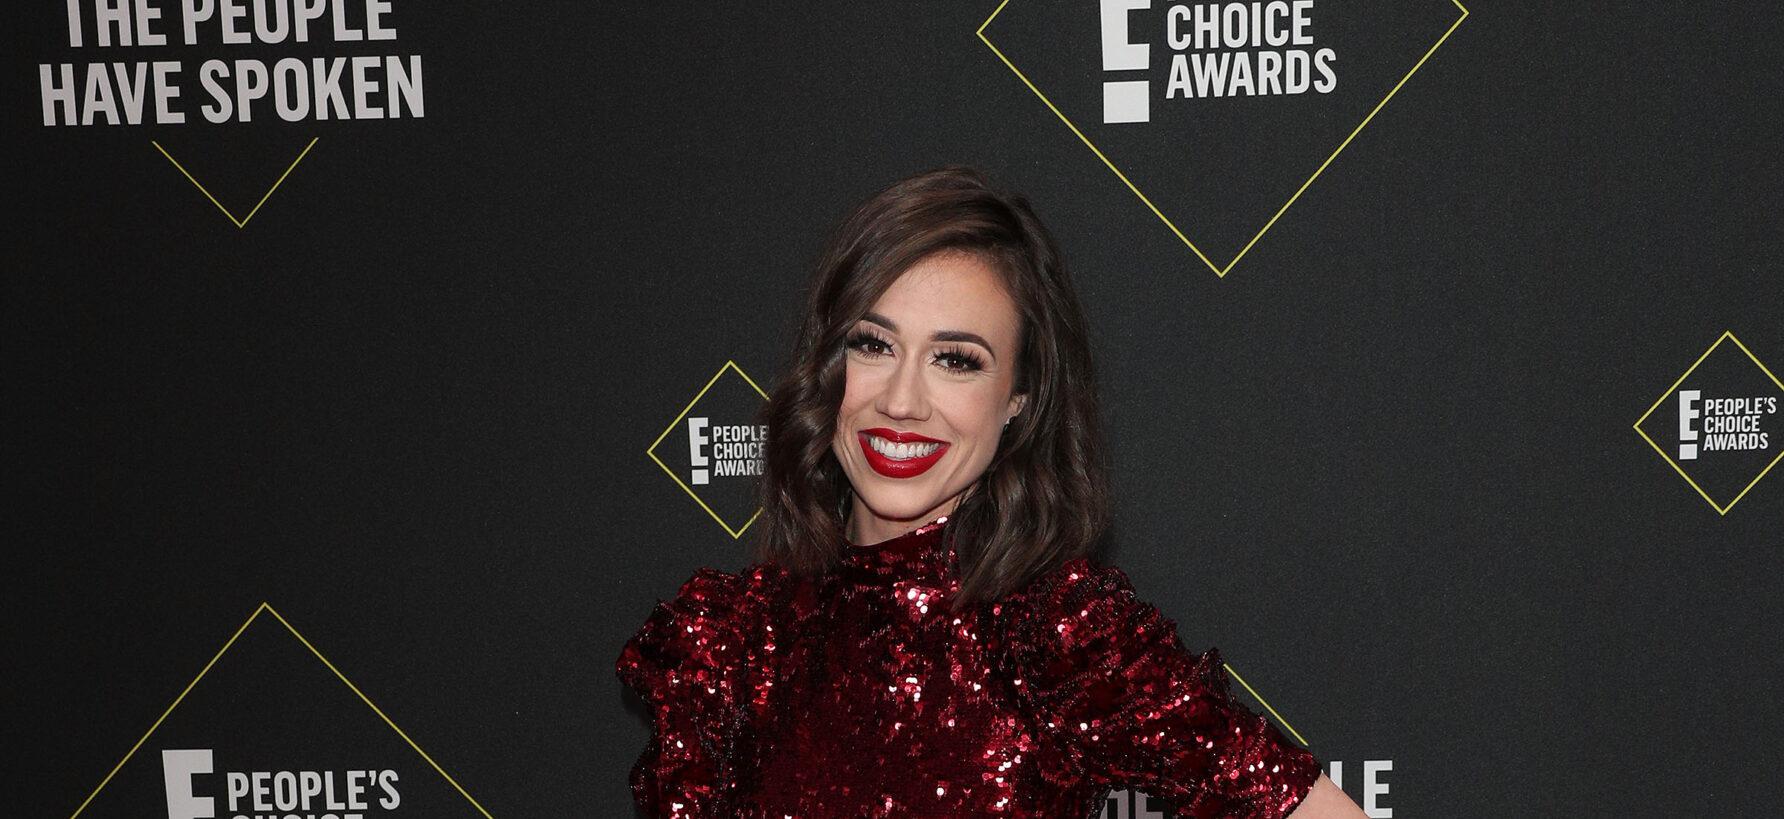 Colleen Ballinger Under Fire For A Fan’s Upsetting Account Of Concert Experience